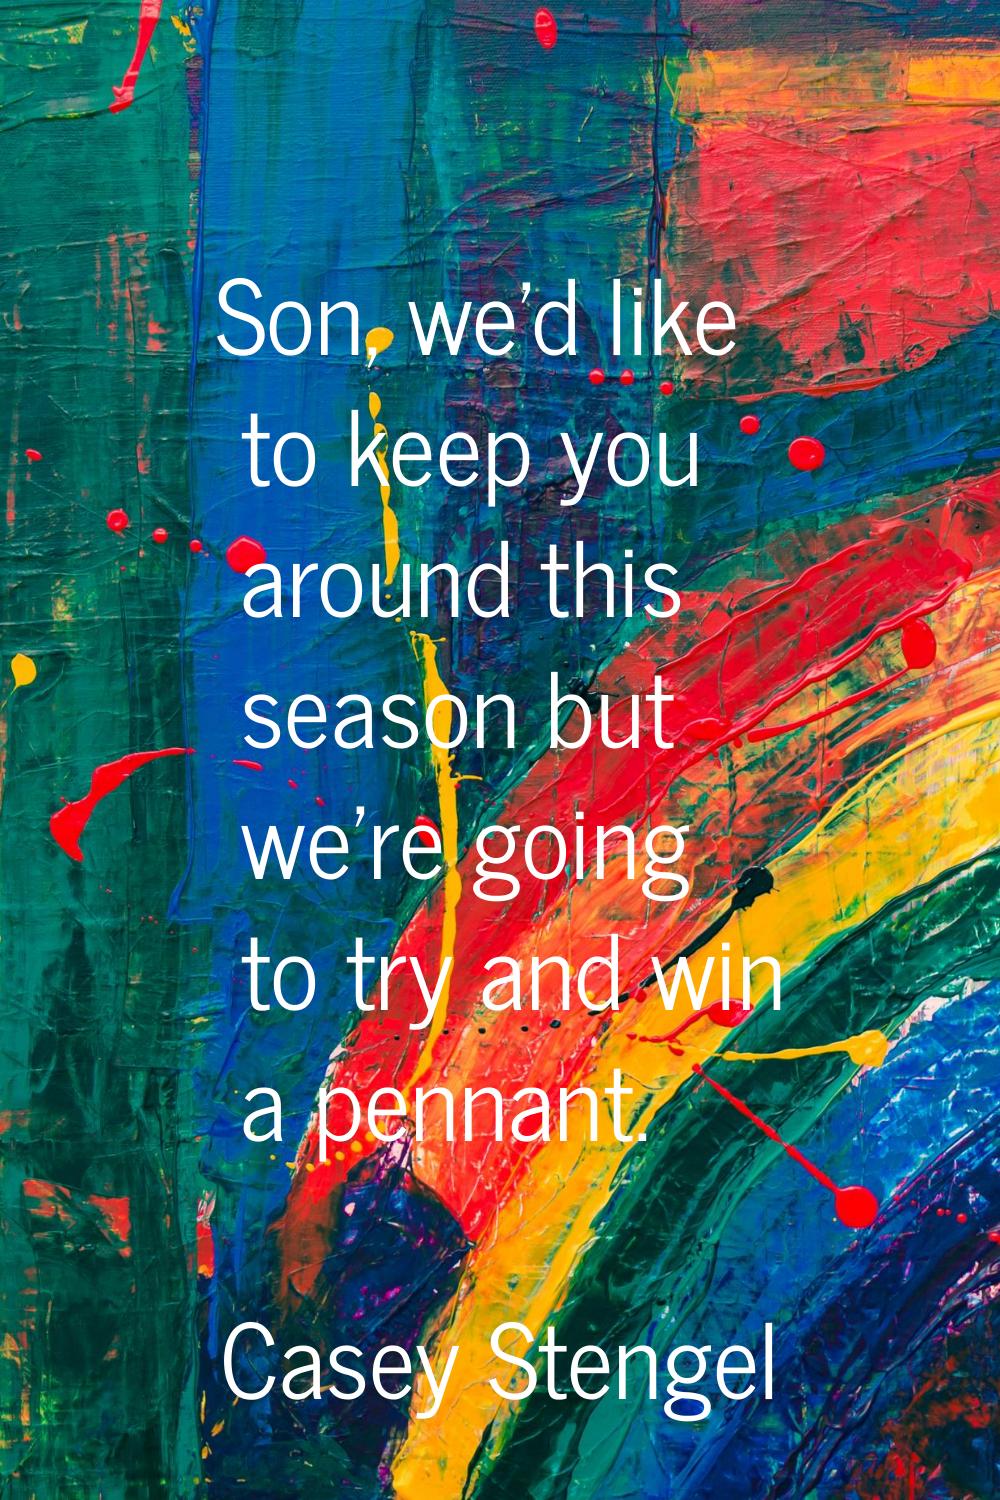 Son, we'd like to keep you around this season but we're going to try and win a pennant.